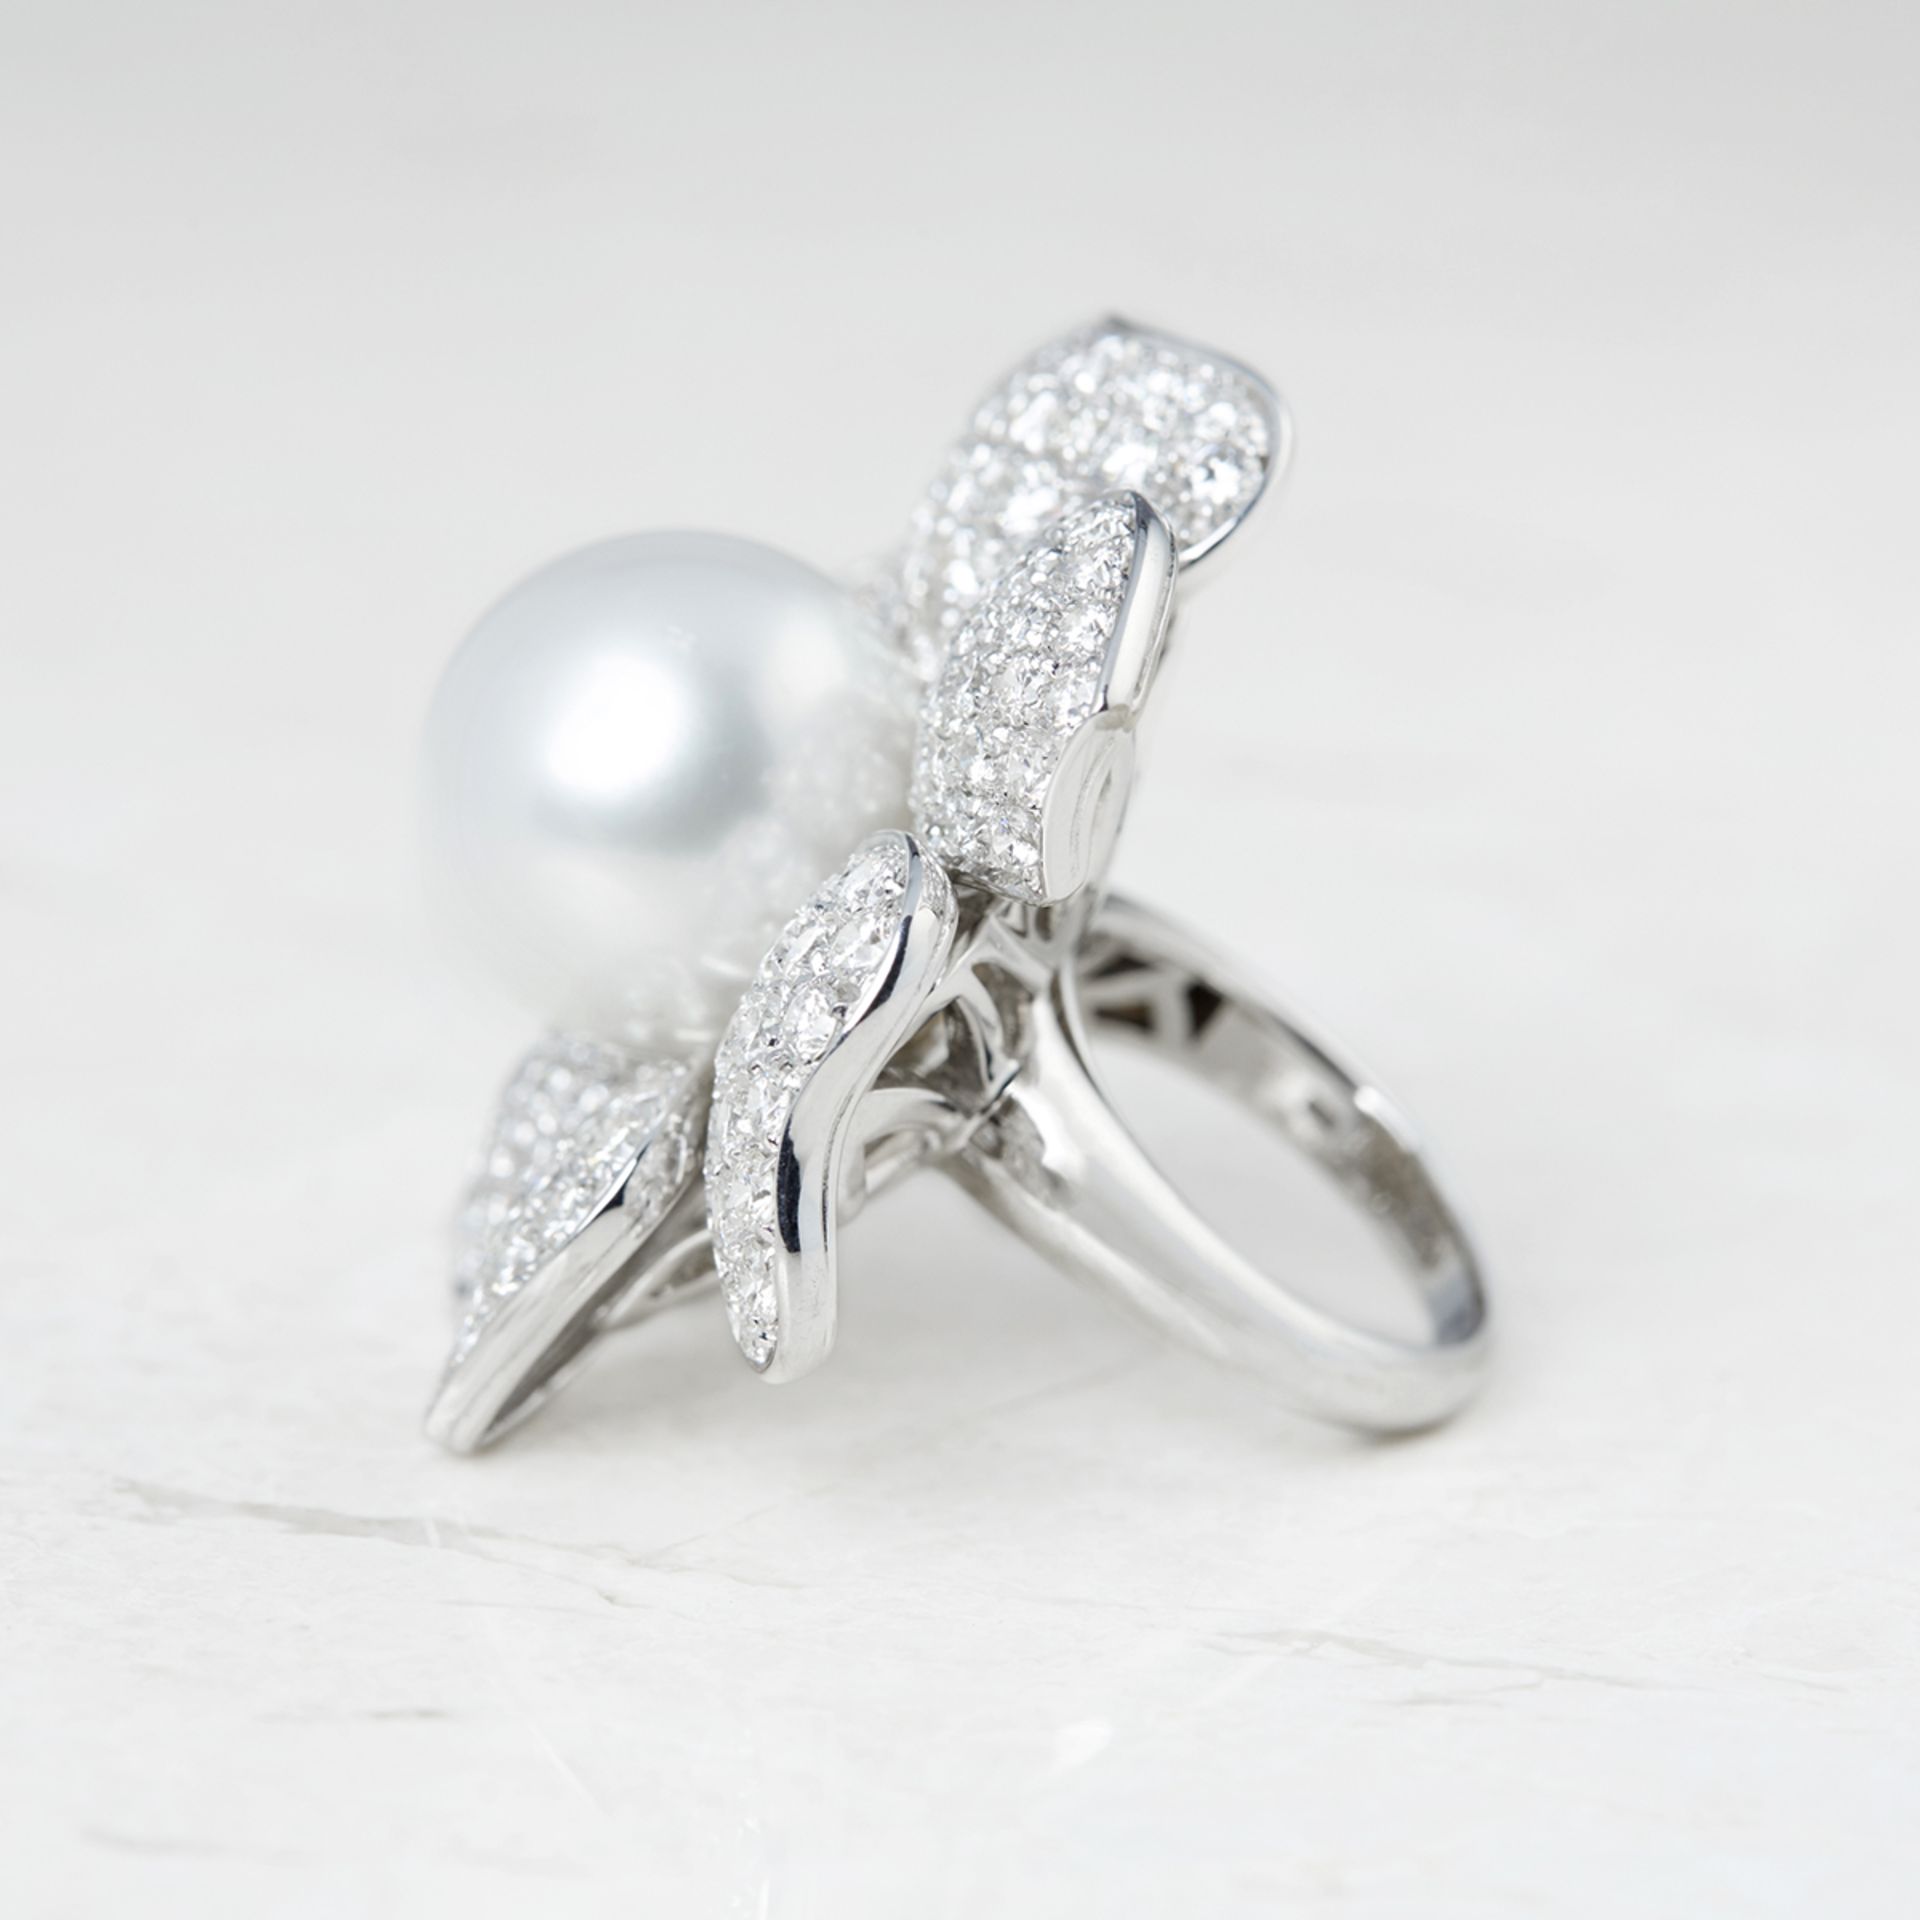 Picchiotti 18k White Gold South Sea Pearl & 7.80ct Diamond Flower Ring - Image 5 of 5